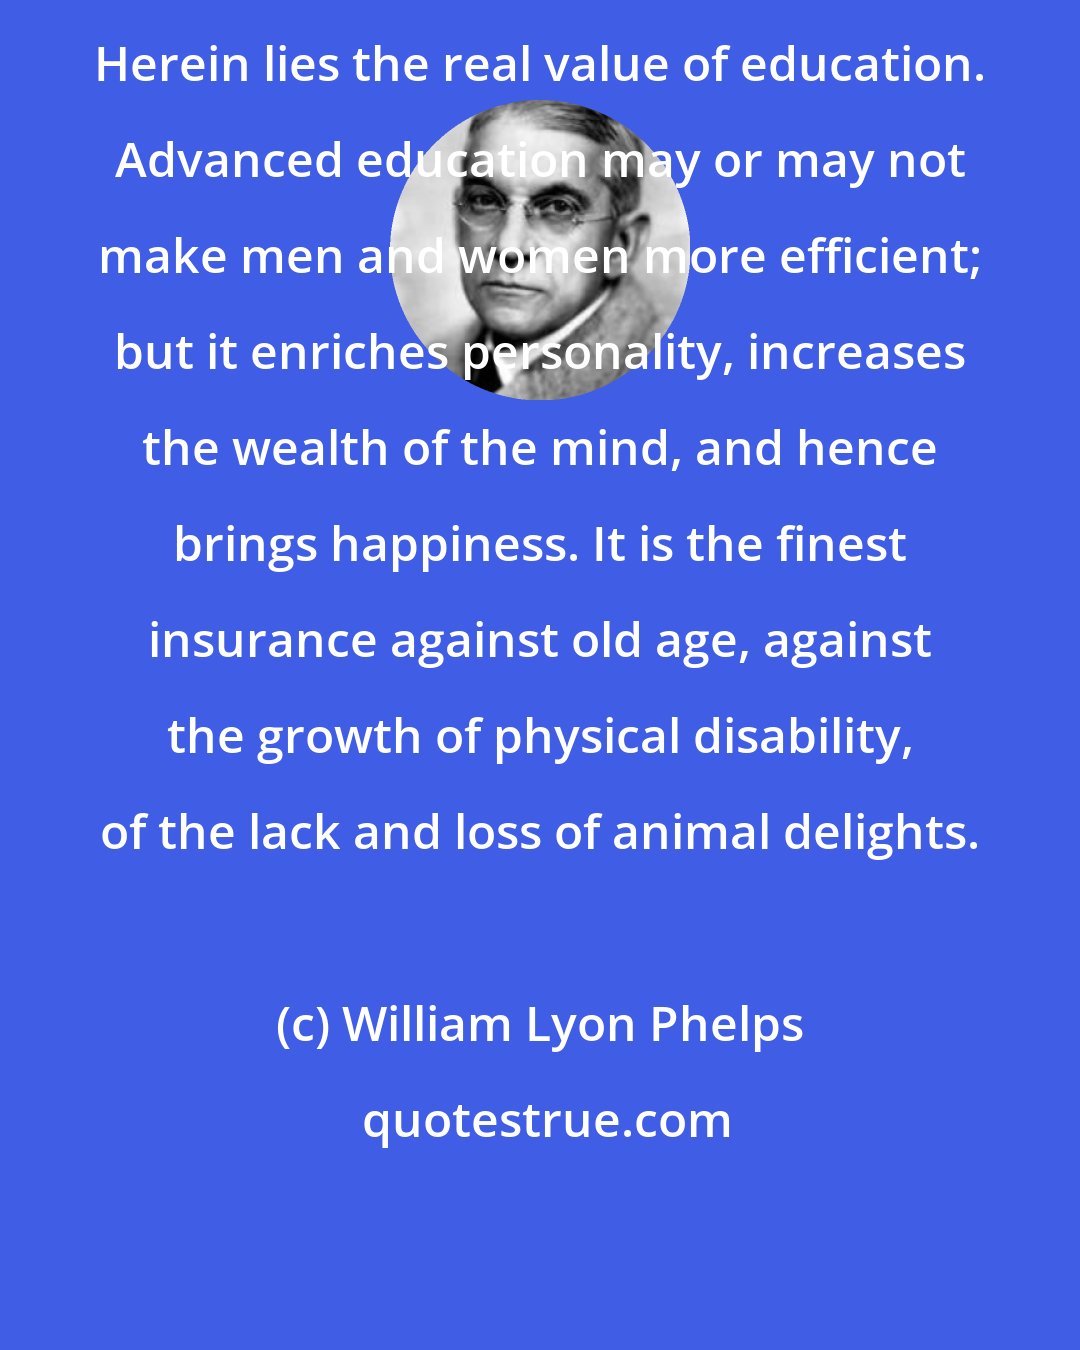 William Lyon Phelps: Herein lies the real value of education. Advanced education may or may not make men and women more efficient; but it enriches personality, increases the wealth of the mind, and hence brings happiness. It is the finest insurance against old age, against the growth of physical disability, of the lack and loss of animal delights.